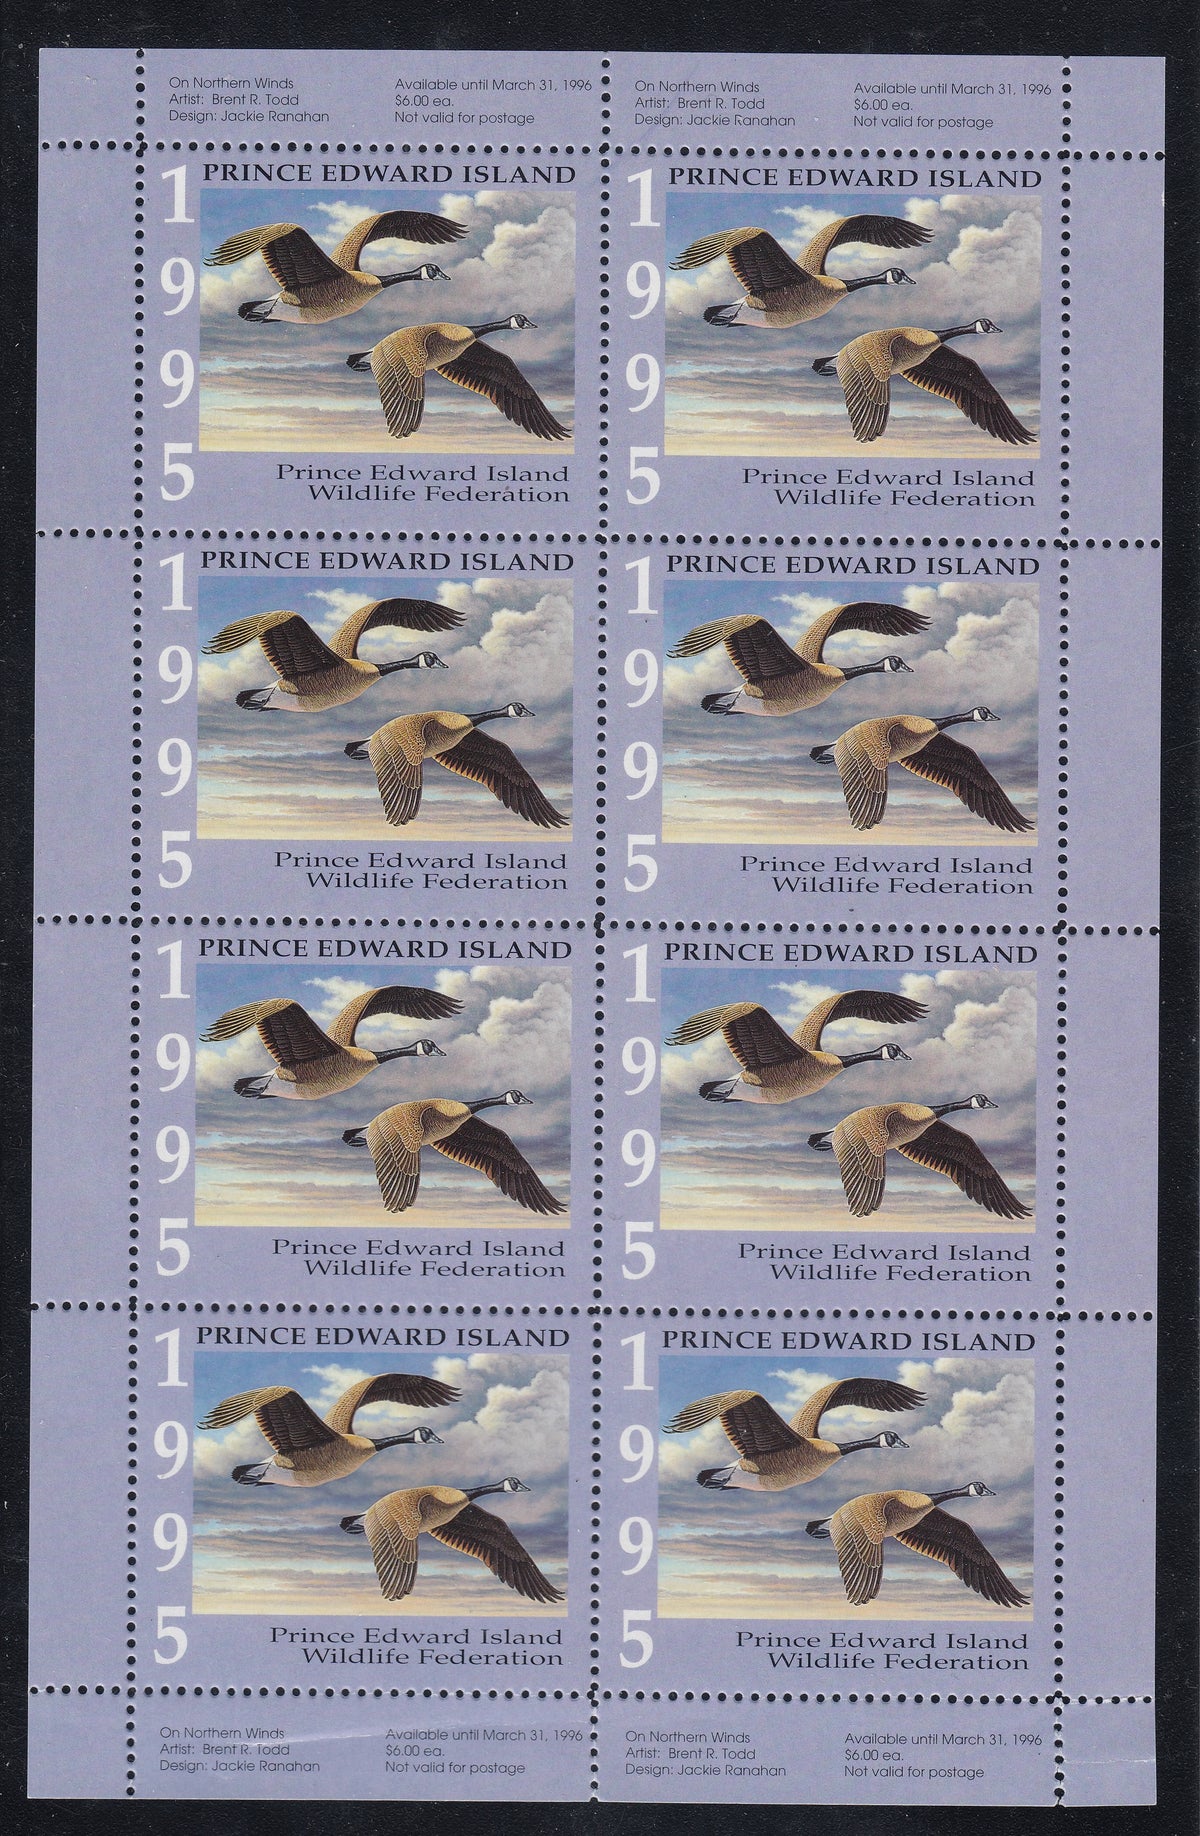 0195PE2207 - PEW1f - MINT COMPLETE SHEET OF 8